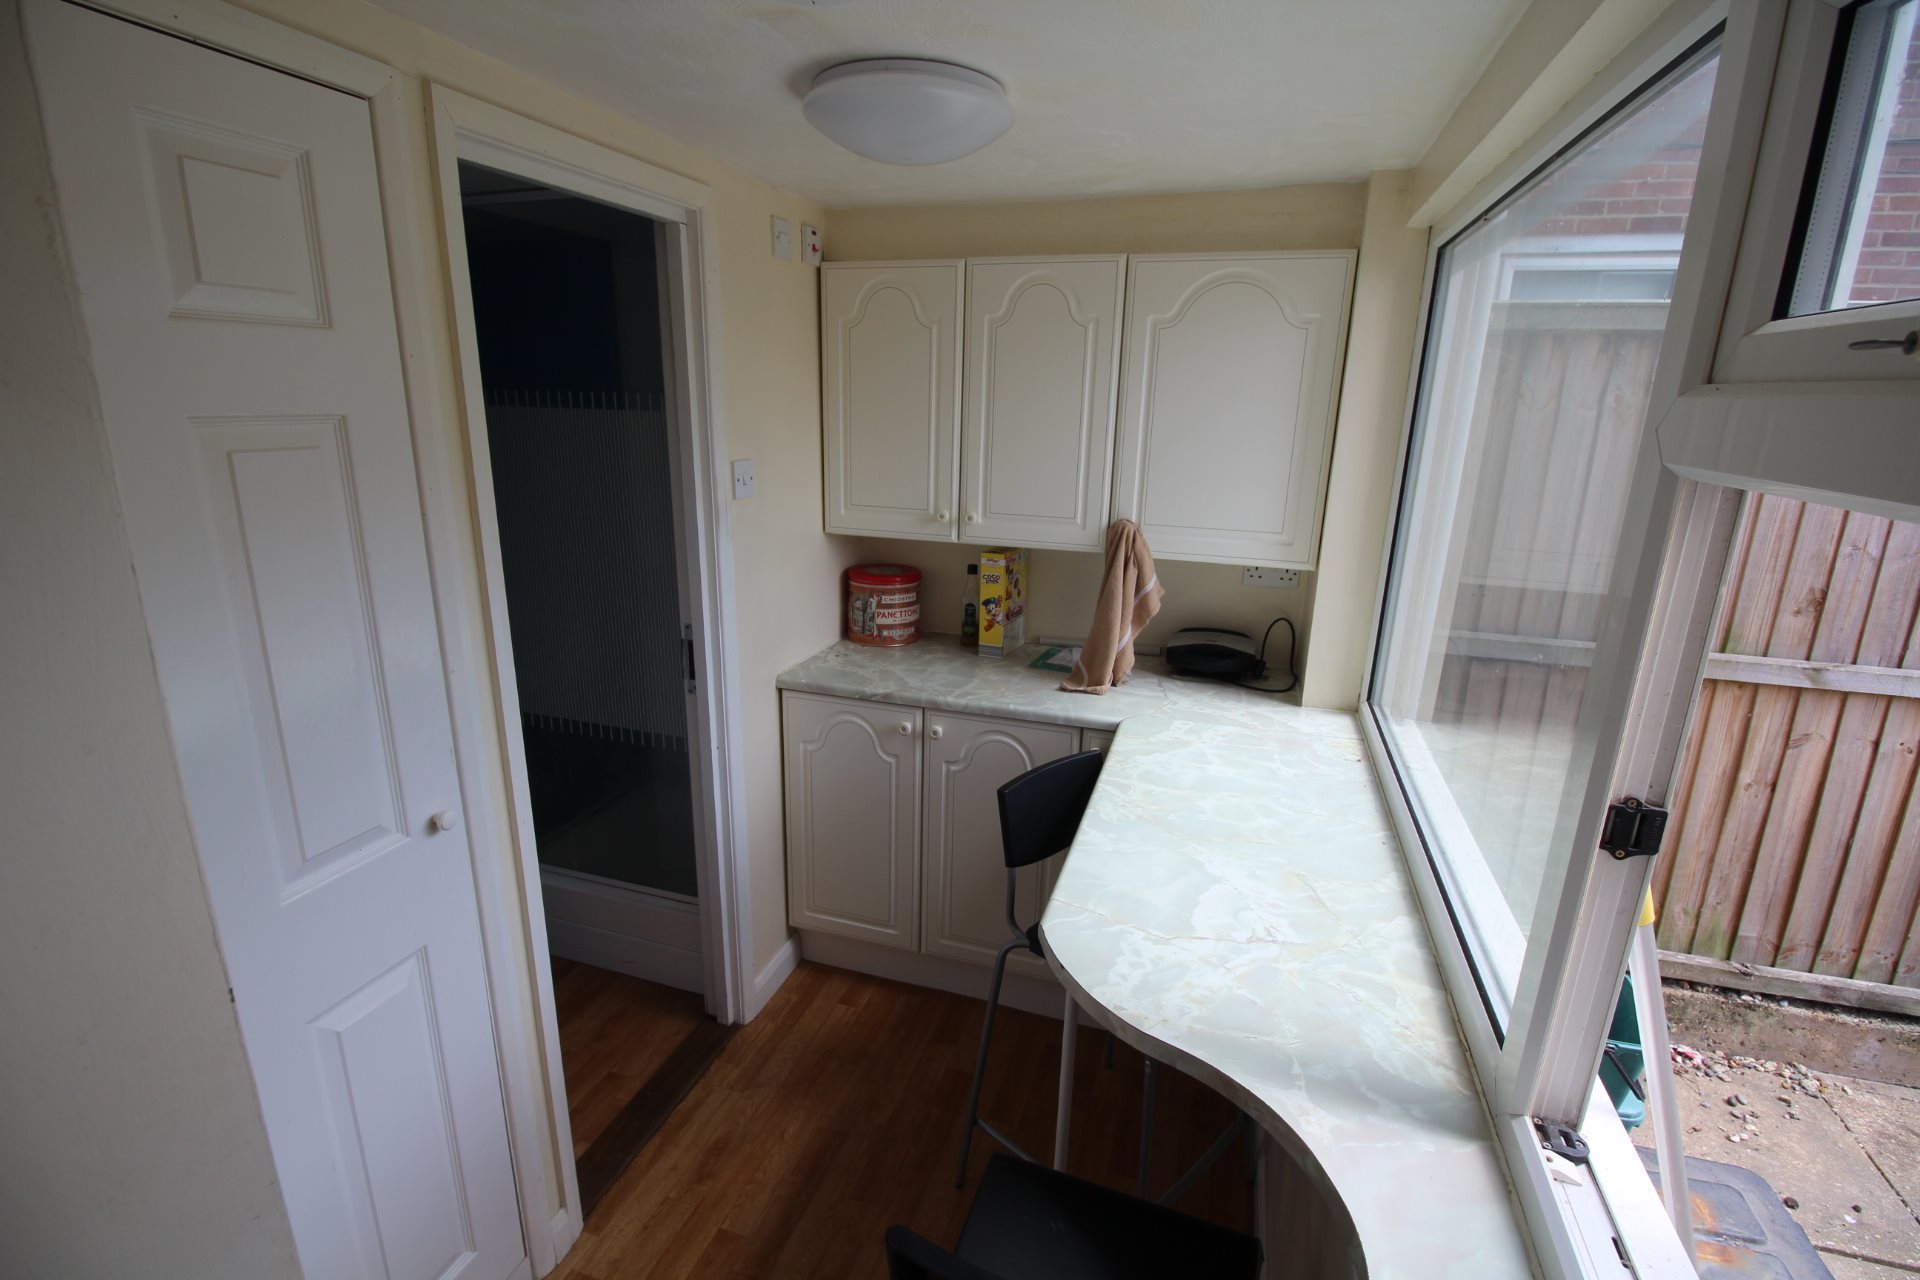 1 bed house / flat share to rent in Petworth Close, Wivenhoe  - Property Image 4